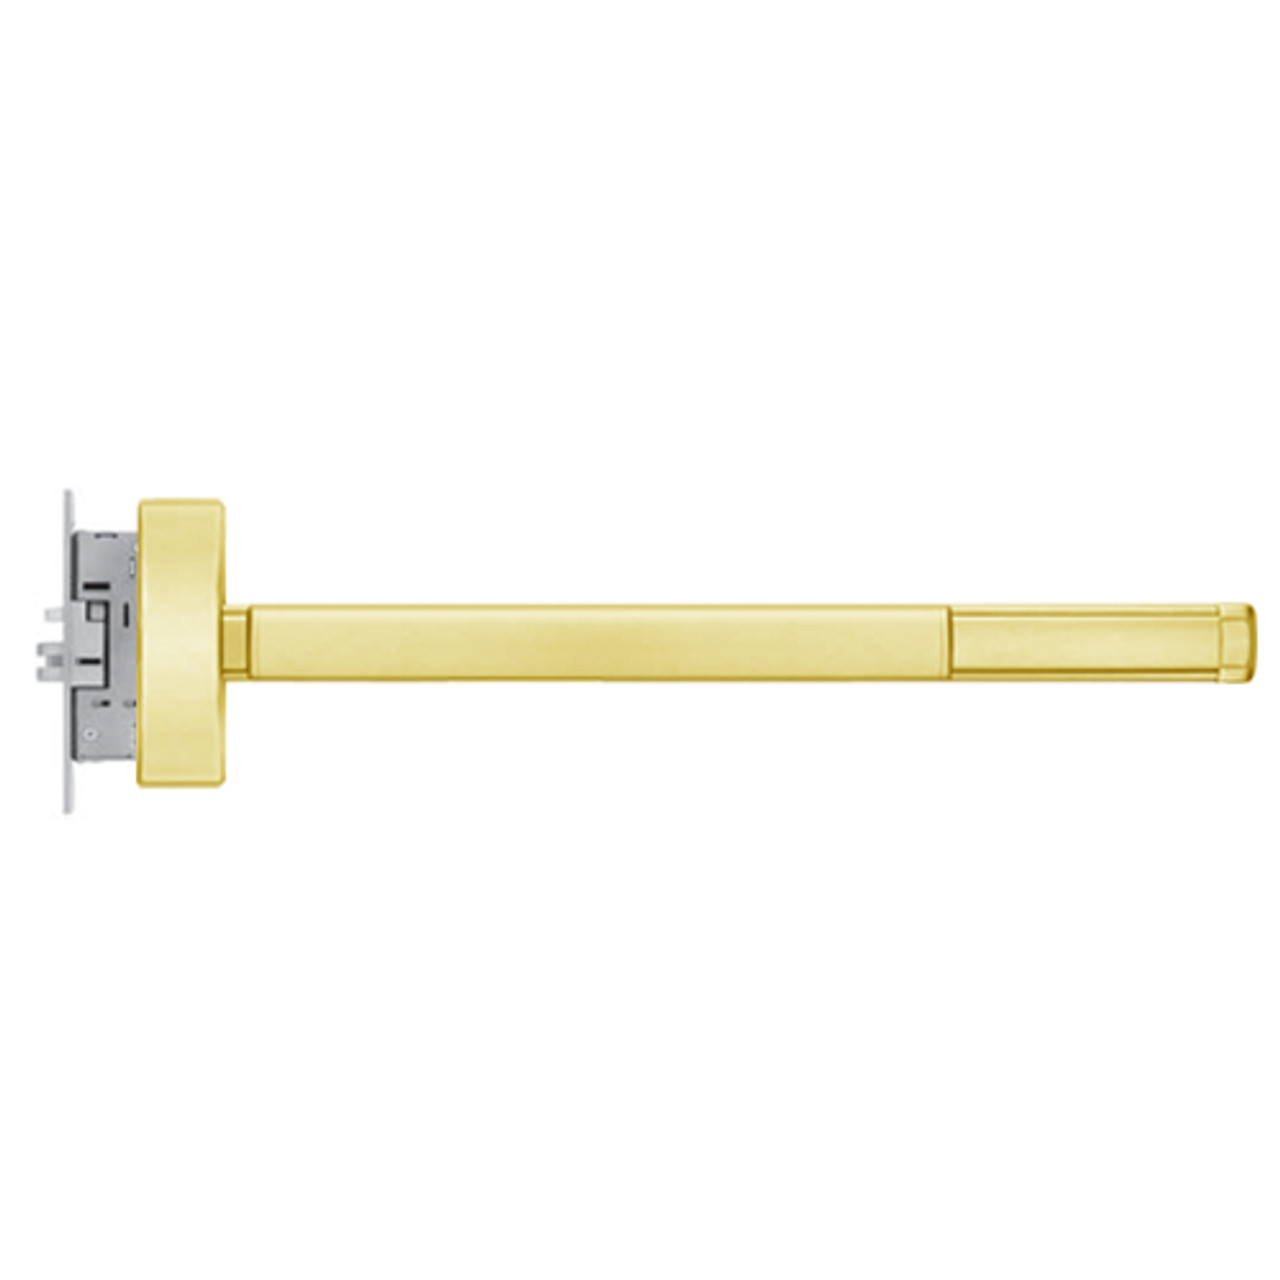 MLRFL2308-LHR-605-36 PHI 2300 Series Fire Rated Apex Mortise Exit Device with Motorized Latch Retraction Prepped for Key Controls Lever/Knob in Bright Brass Finish